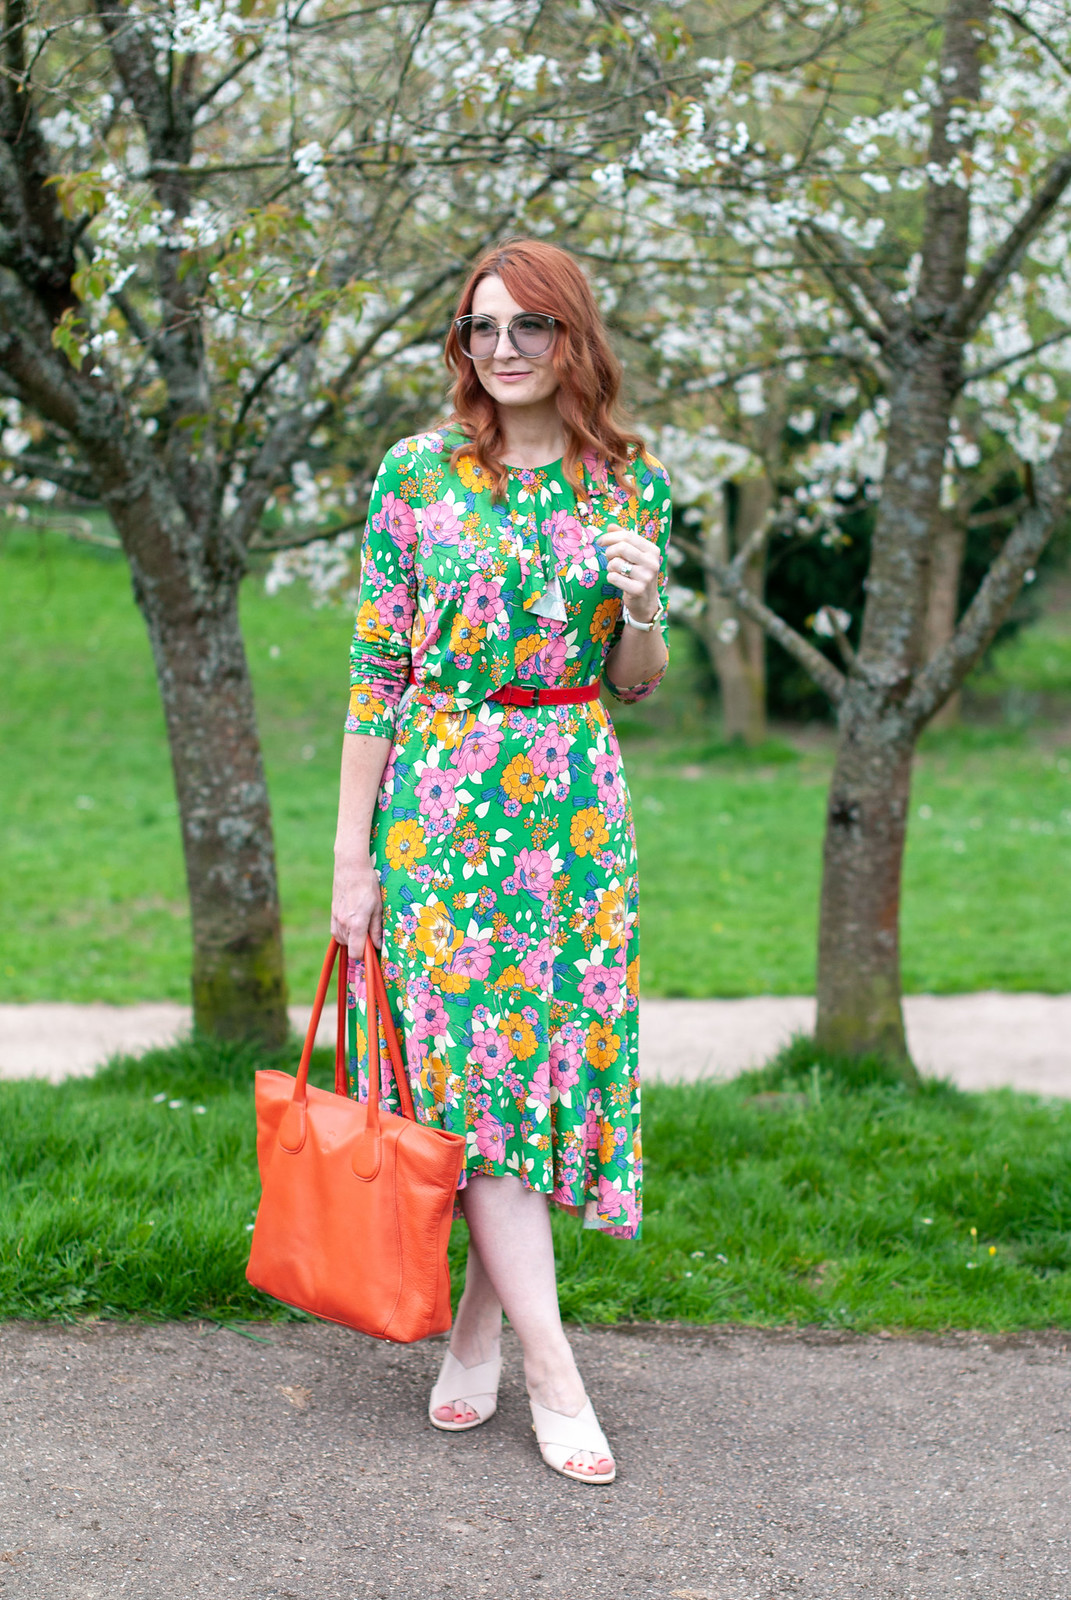 Wearing a Psychedelic Spring Florals Dress: 60 style floral midi dress with asymmetric hem \ summer style \ bright colours \ outfit of the day \ ootd | Not Dressed As Lamb, over 40 style